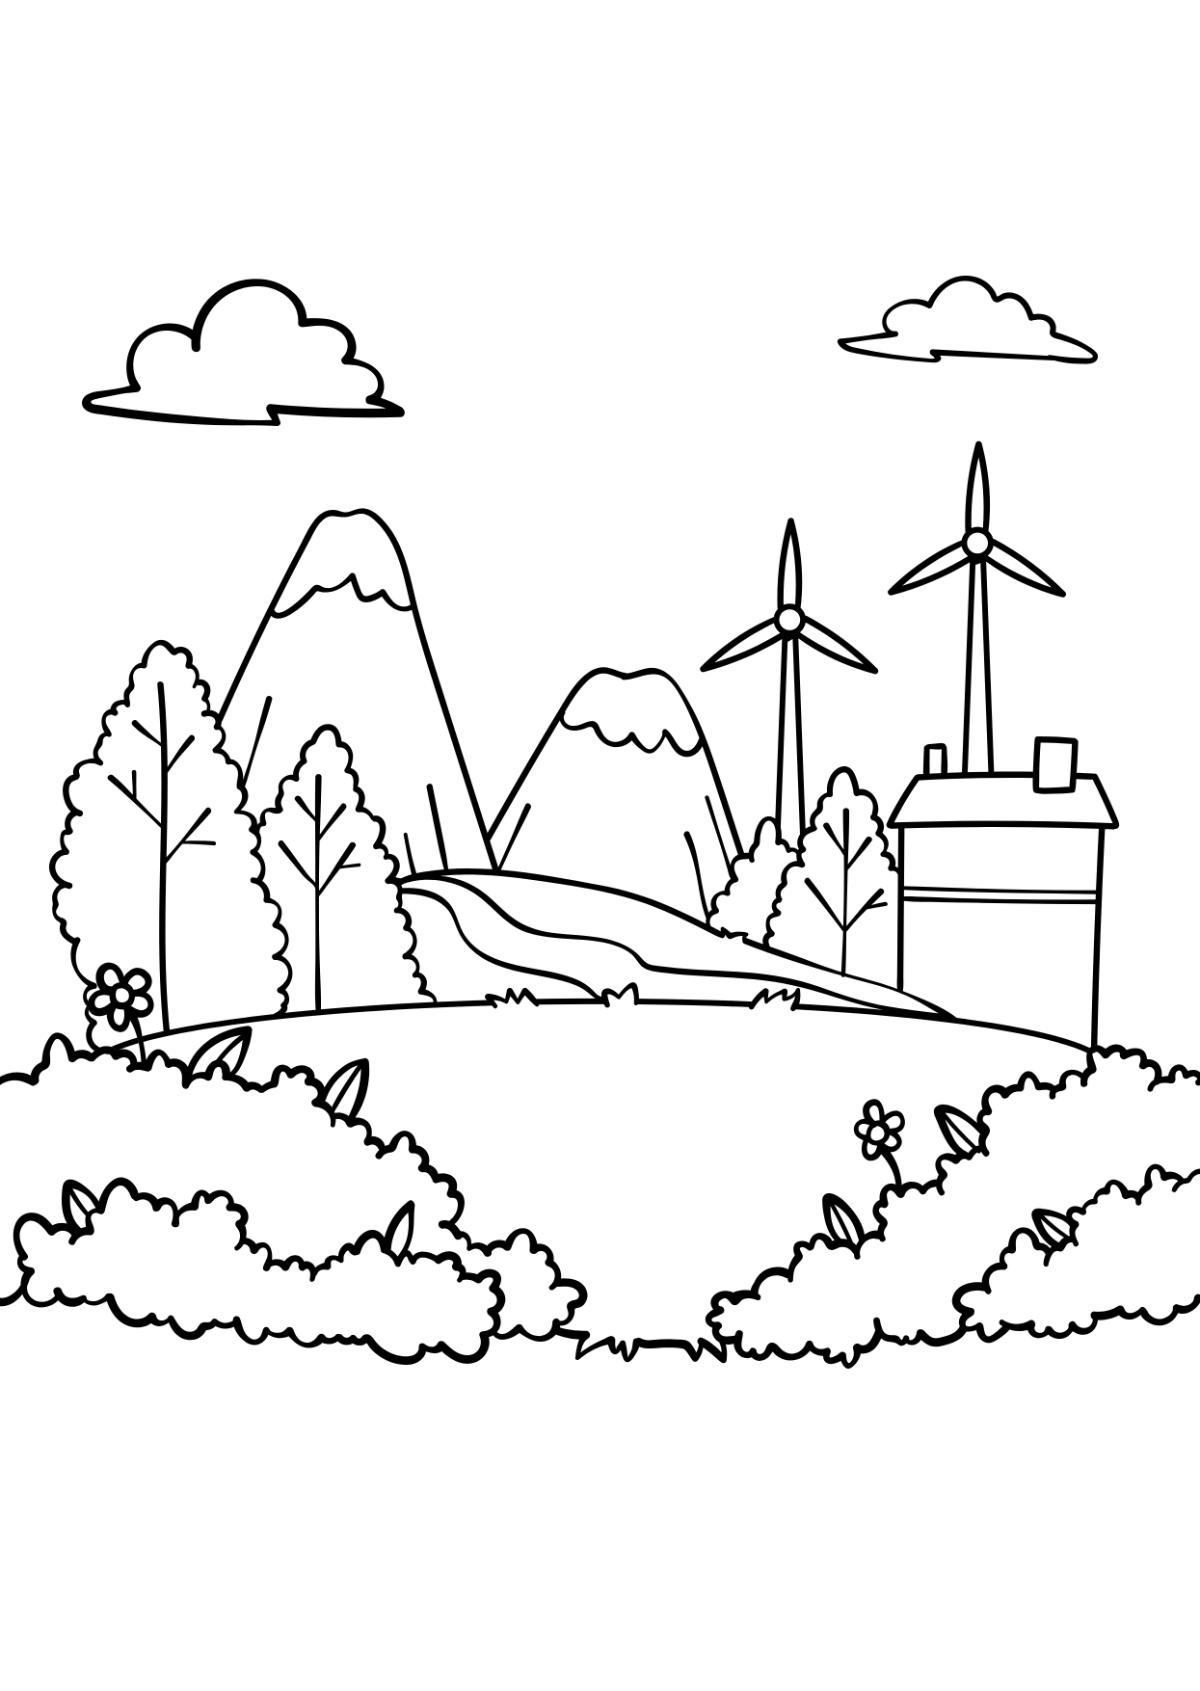 Environment Drawing For Kids Template